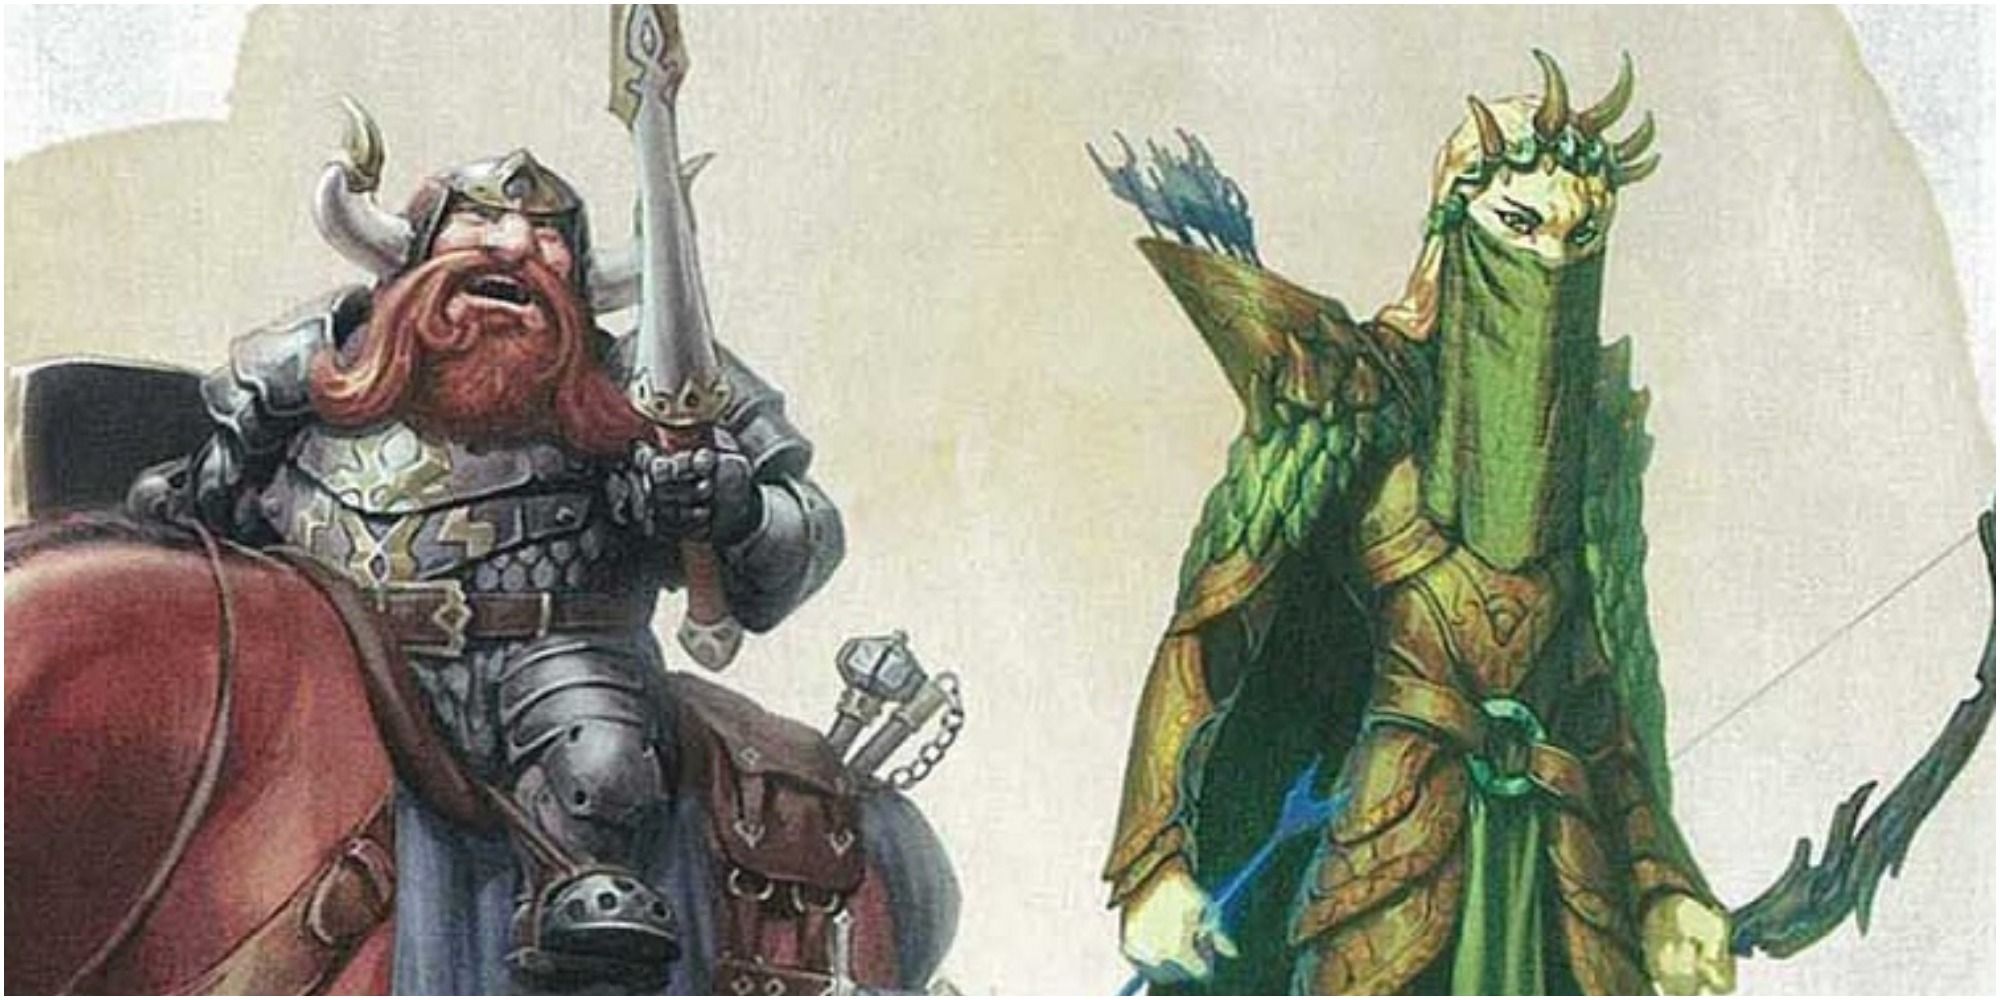 Cavalier fighter and Arcane Archer fighter side by side in Dungeons & Dragons